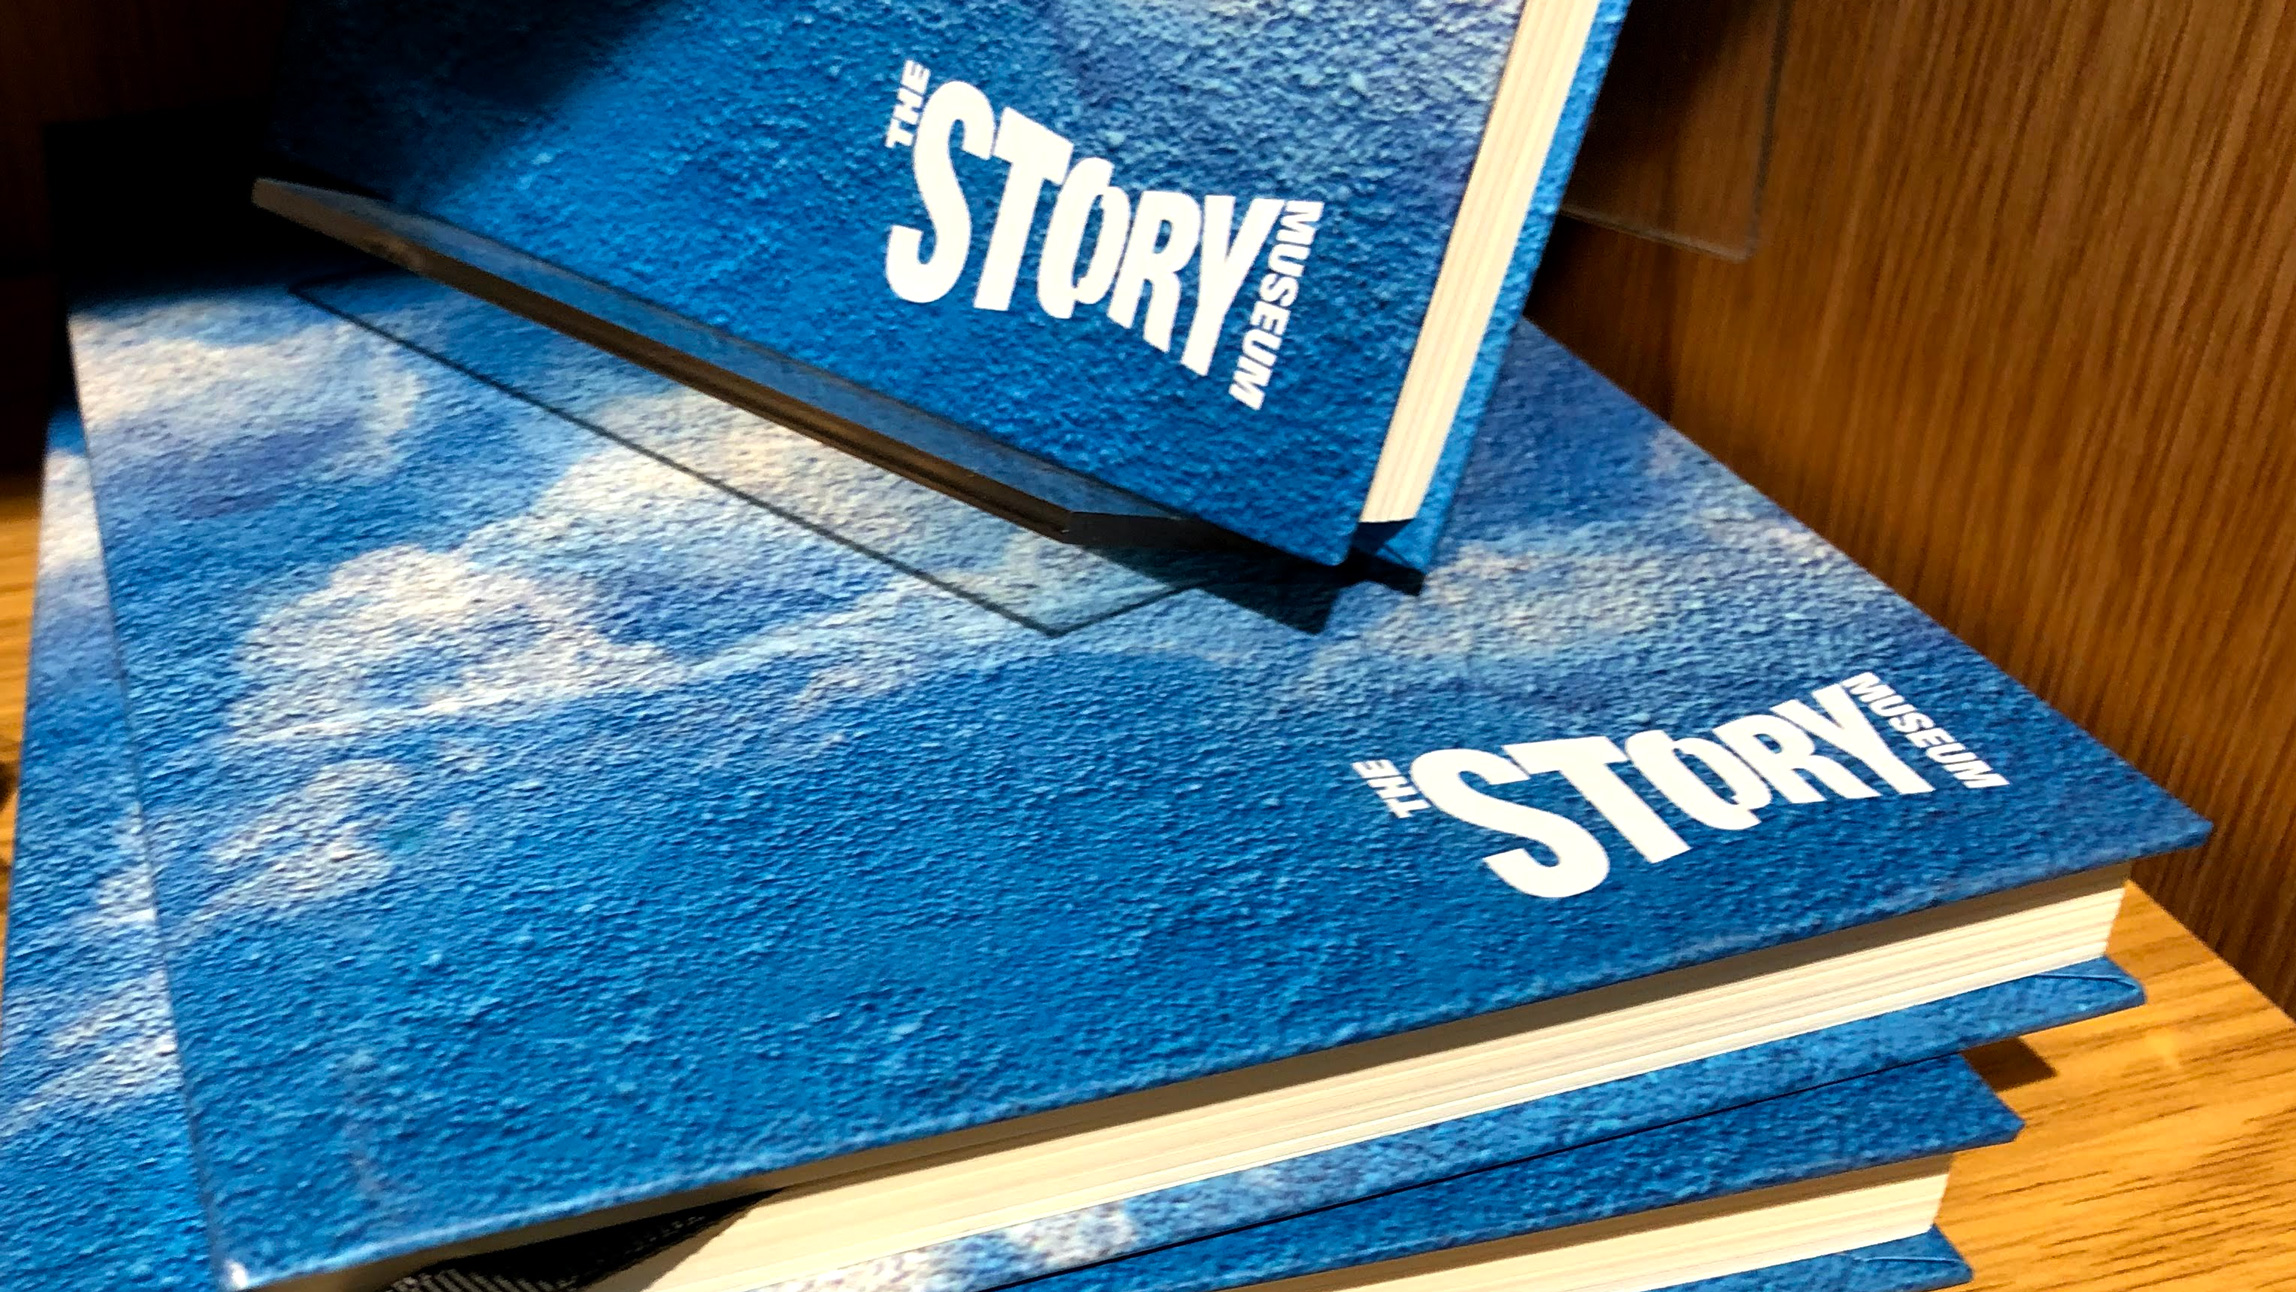 The Story Museum Oxford blue sky mural notebooks